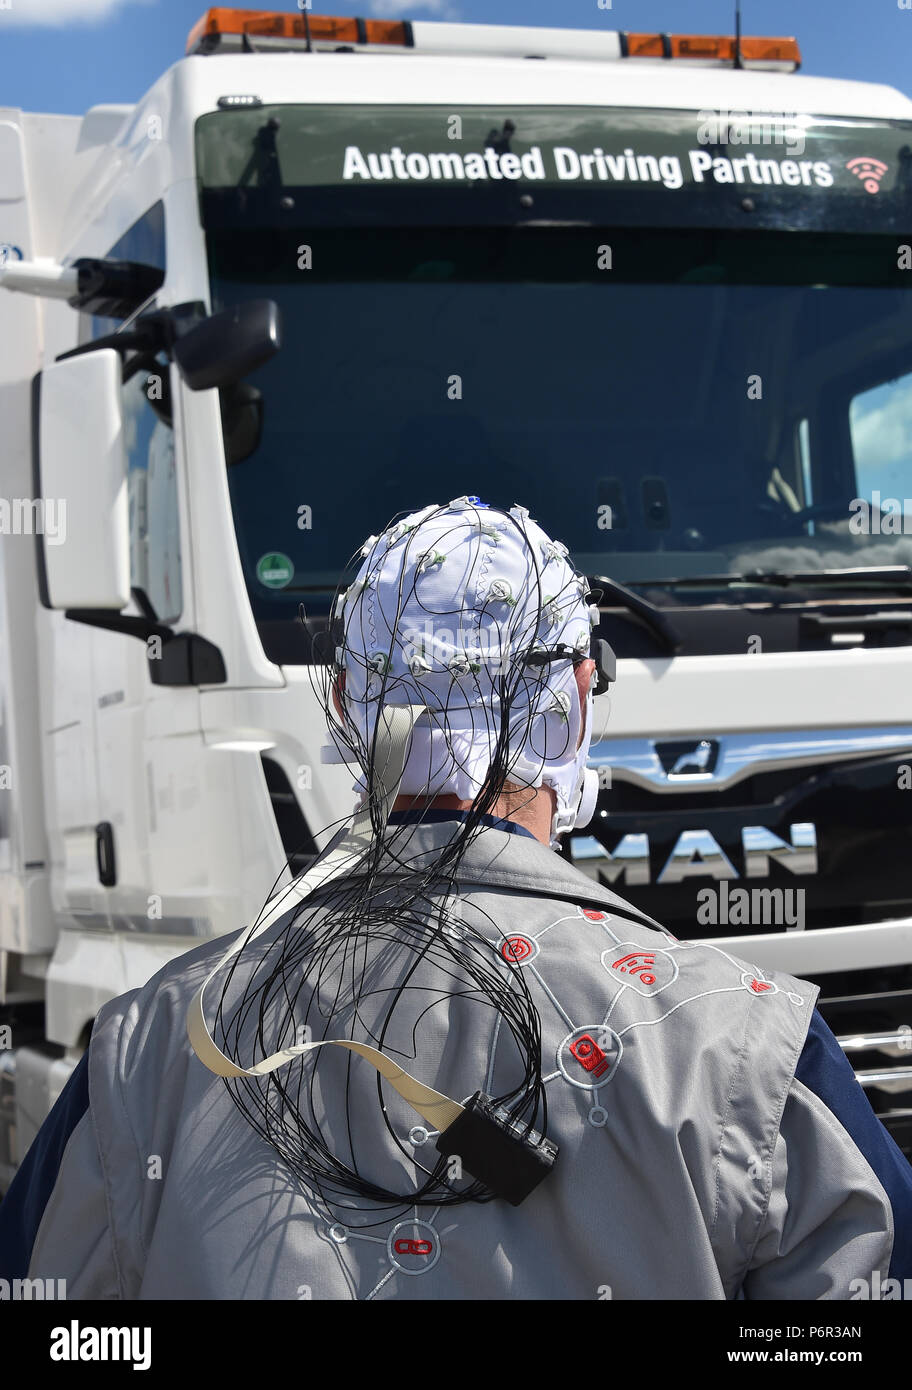 02 July 2018, Germany, Selchow: Truck driver Andy Kipping wearing a control system with which - with the aid of electroencephalography (EEG) and eye tracking - the effects of semi-autonomous driving on the driver's wakefulness and role understanding can be tracked, during a demonstration of platooning in autonomous driving in the unused south strip of Schoenefeld Airport. Platooning is convoy driving with very small distances between trucks through the aid of a technological driving system. DB Schenker, MAN Truck & Bus and the Fresenius University of Applied Sciences are for the first time tes Stock Photo